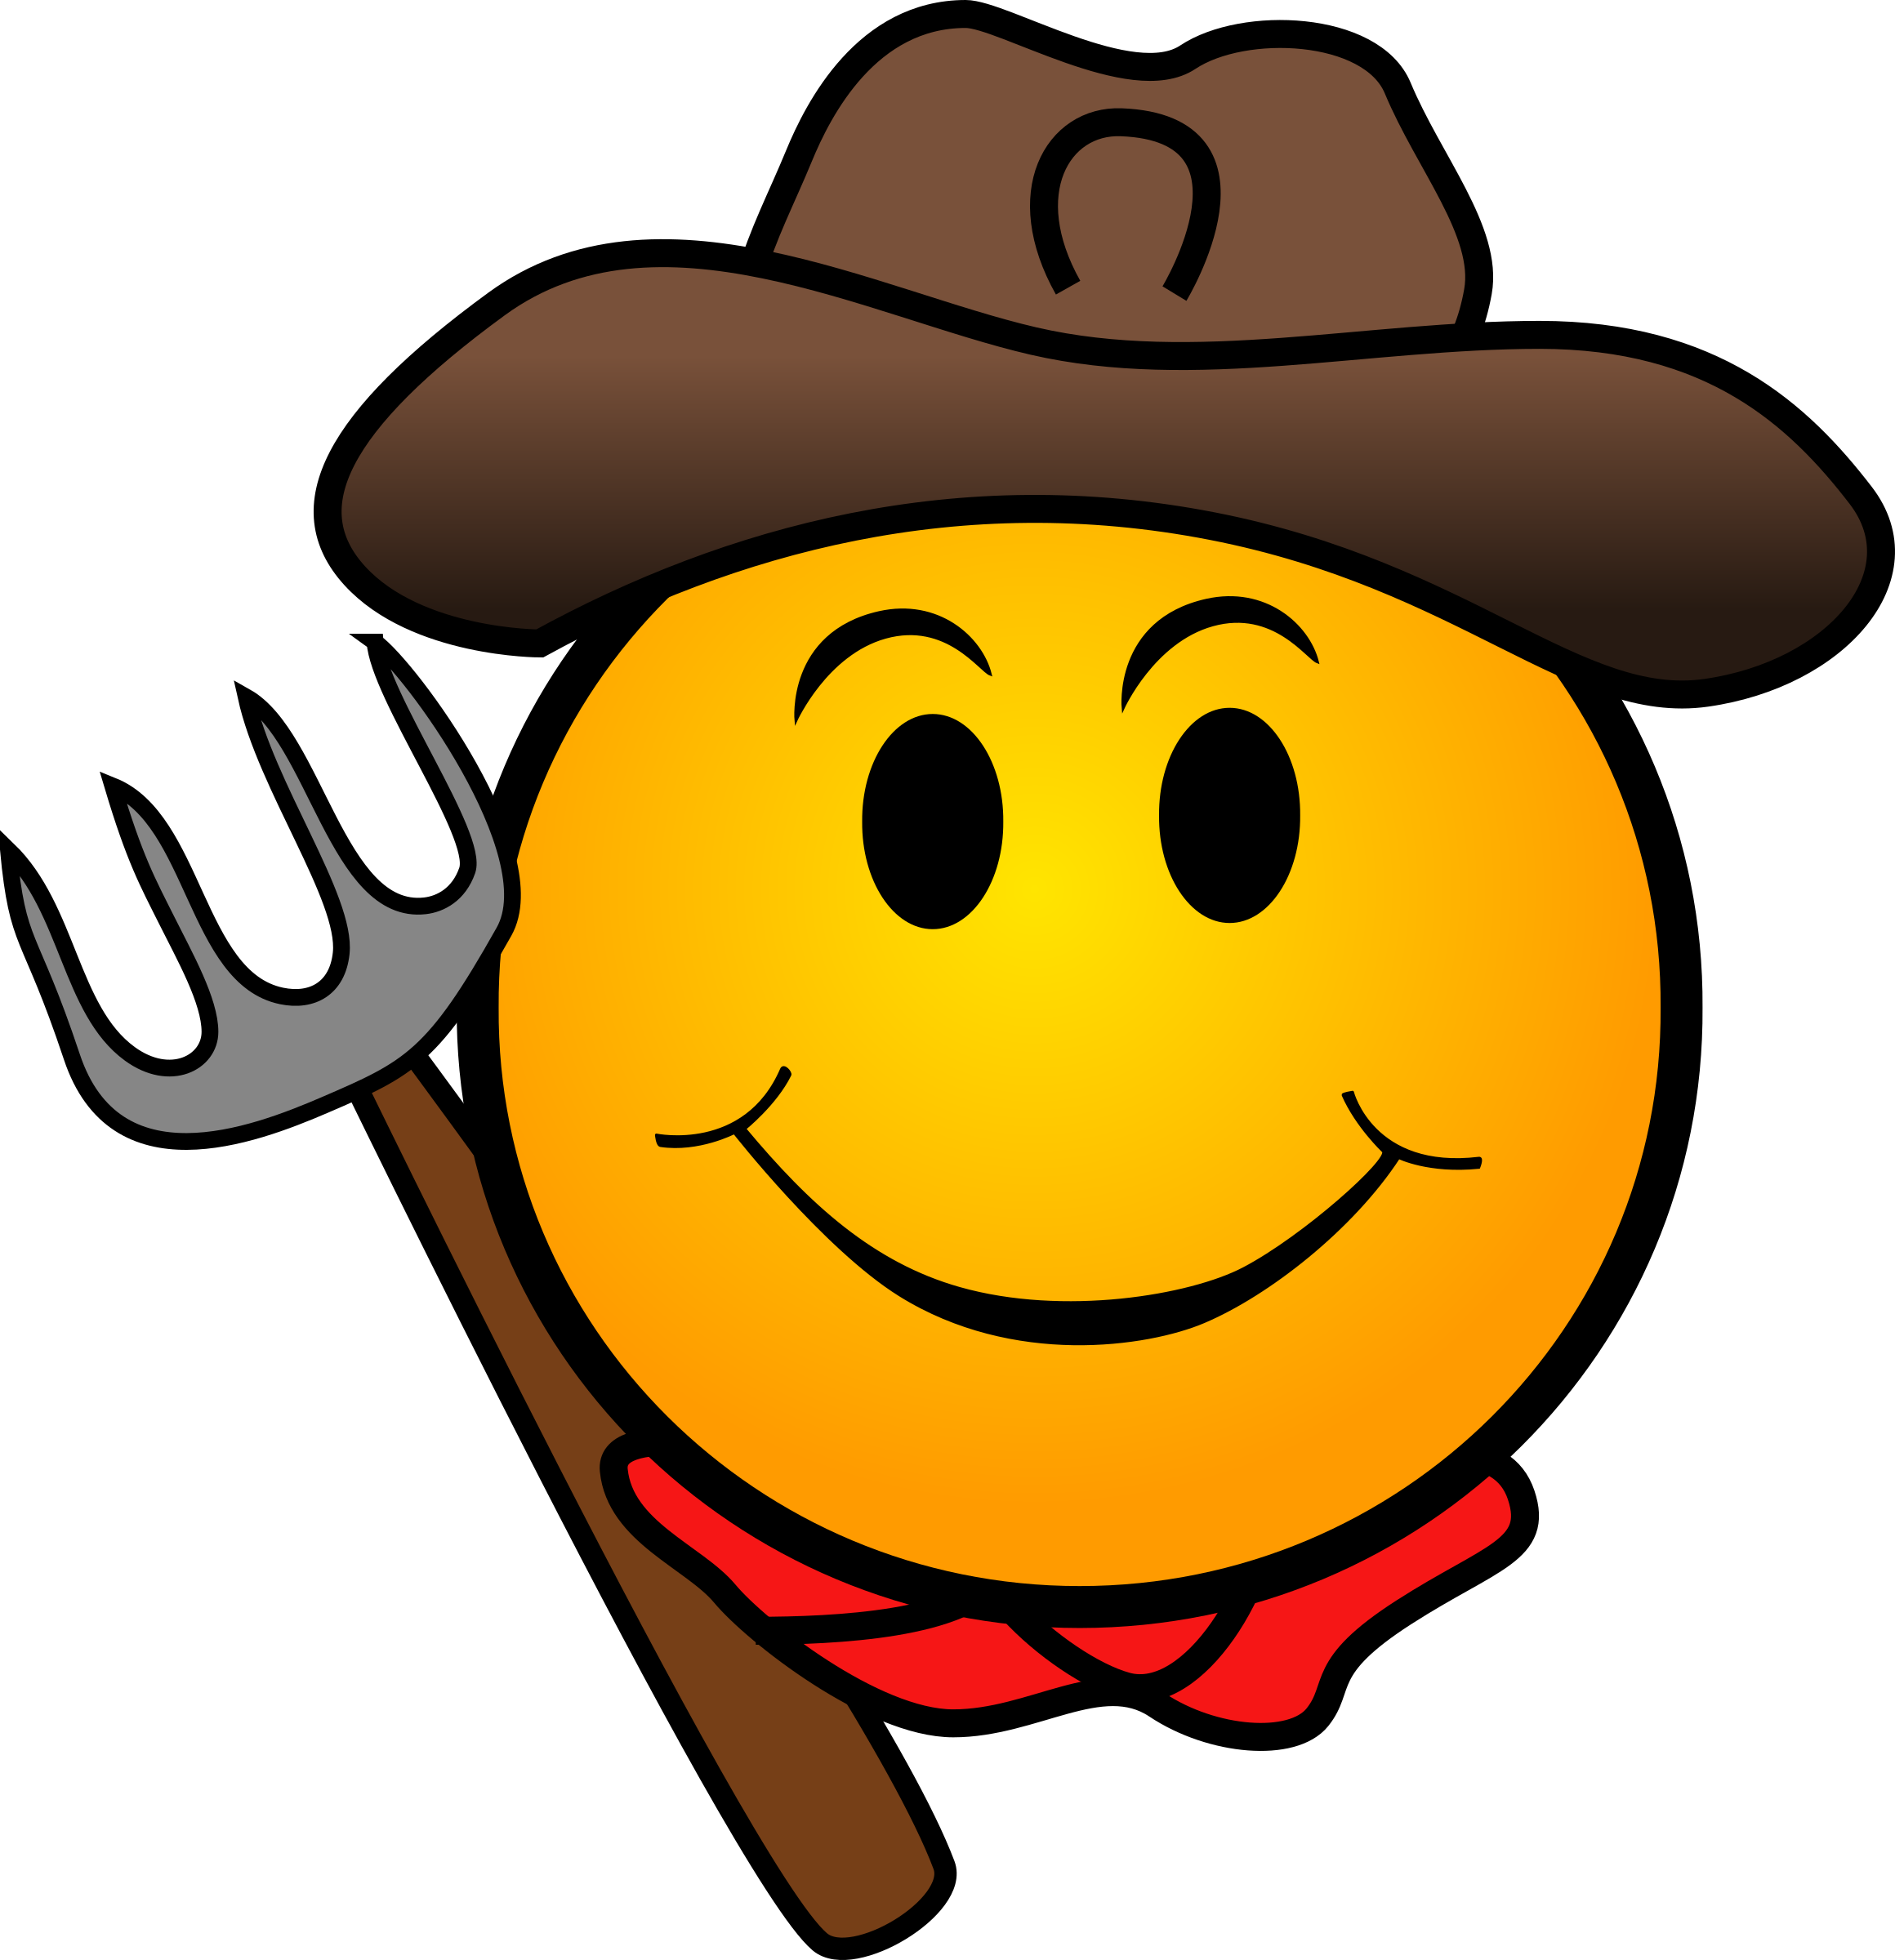 ms office clipart smiley - photo #34